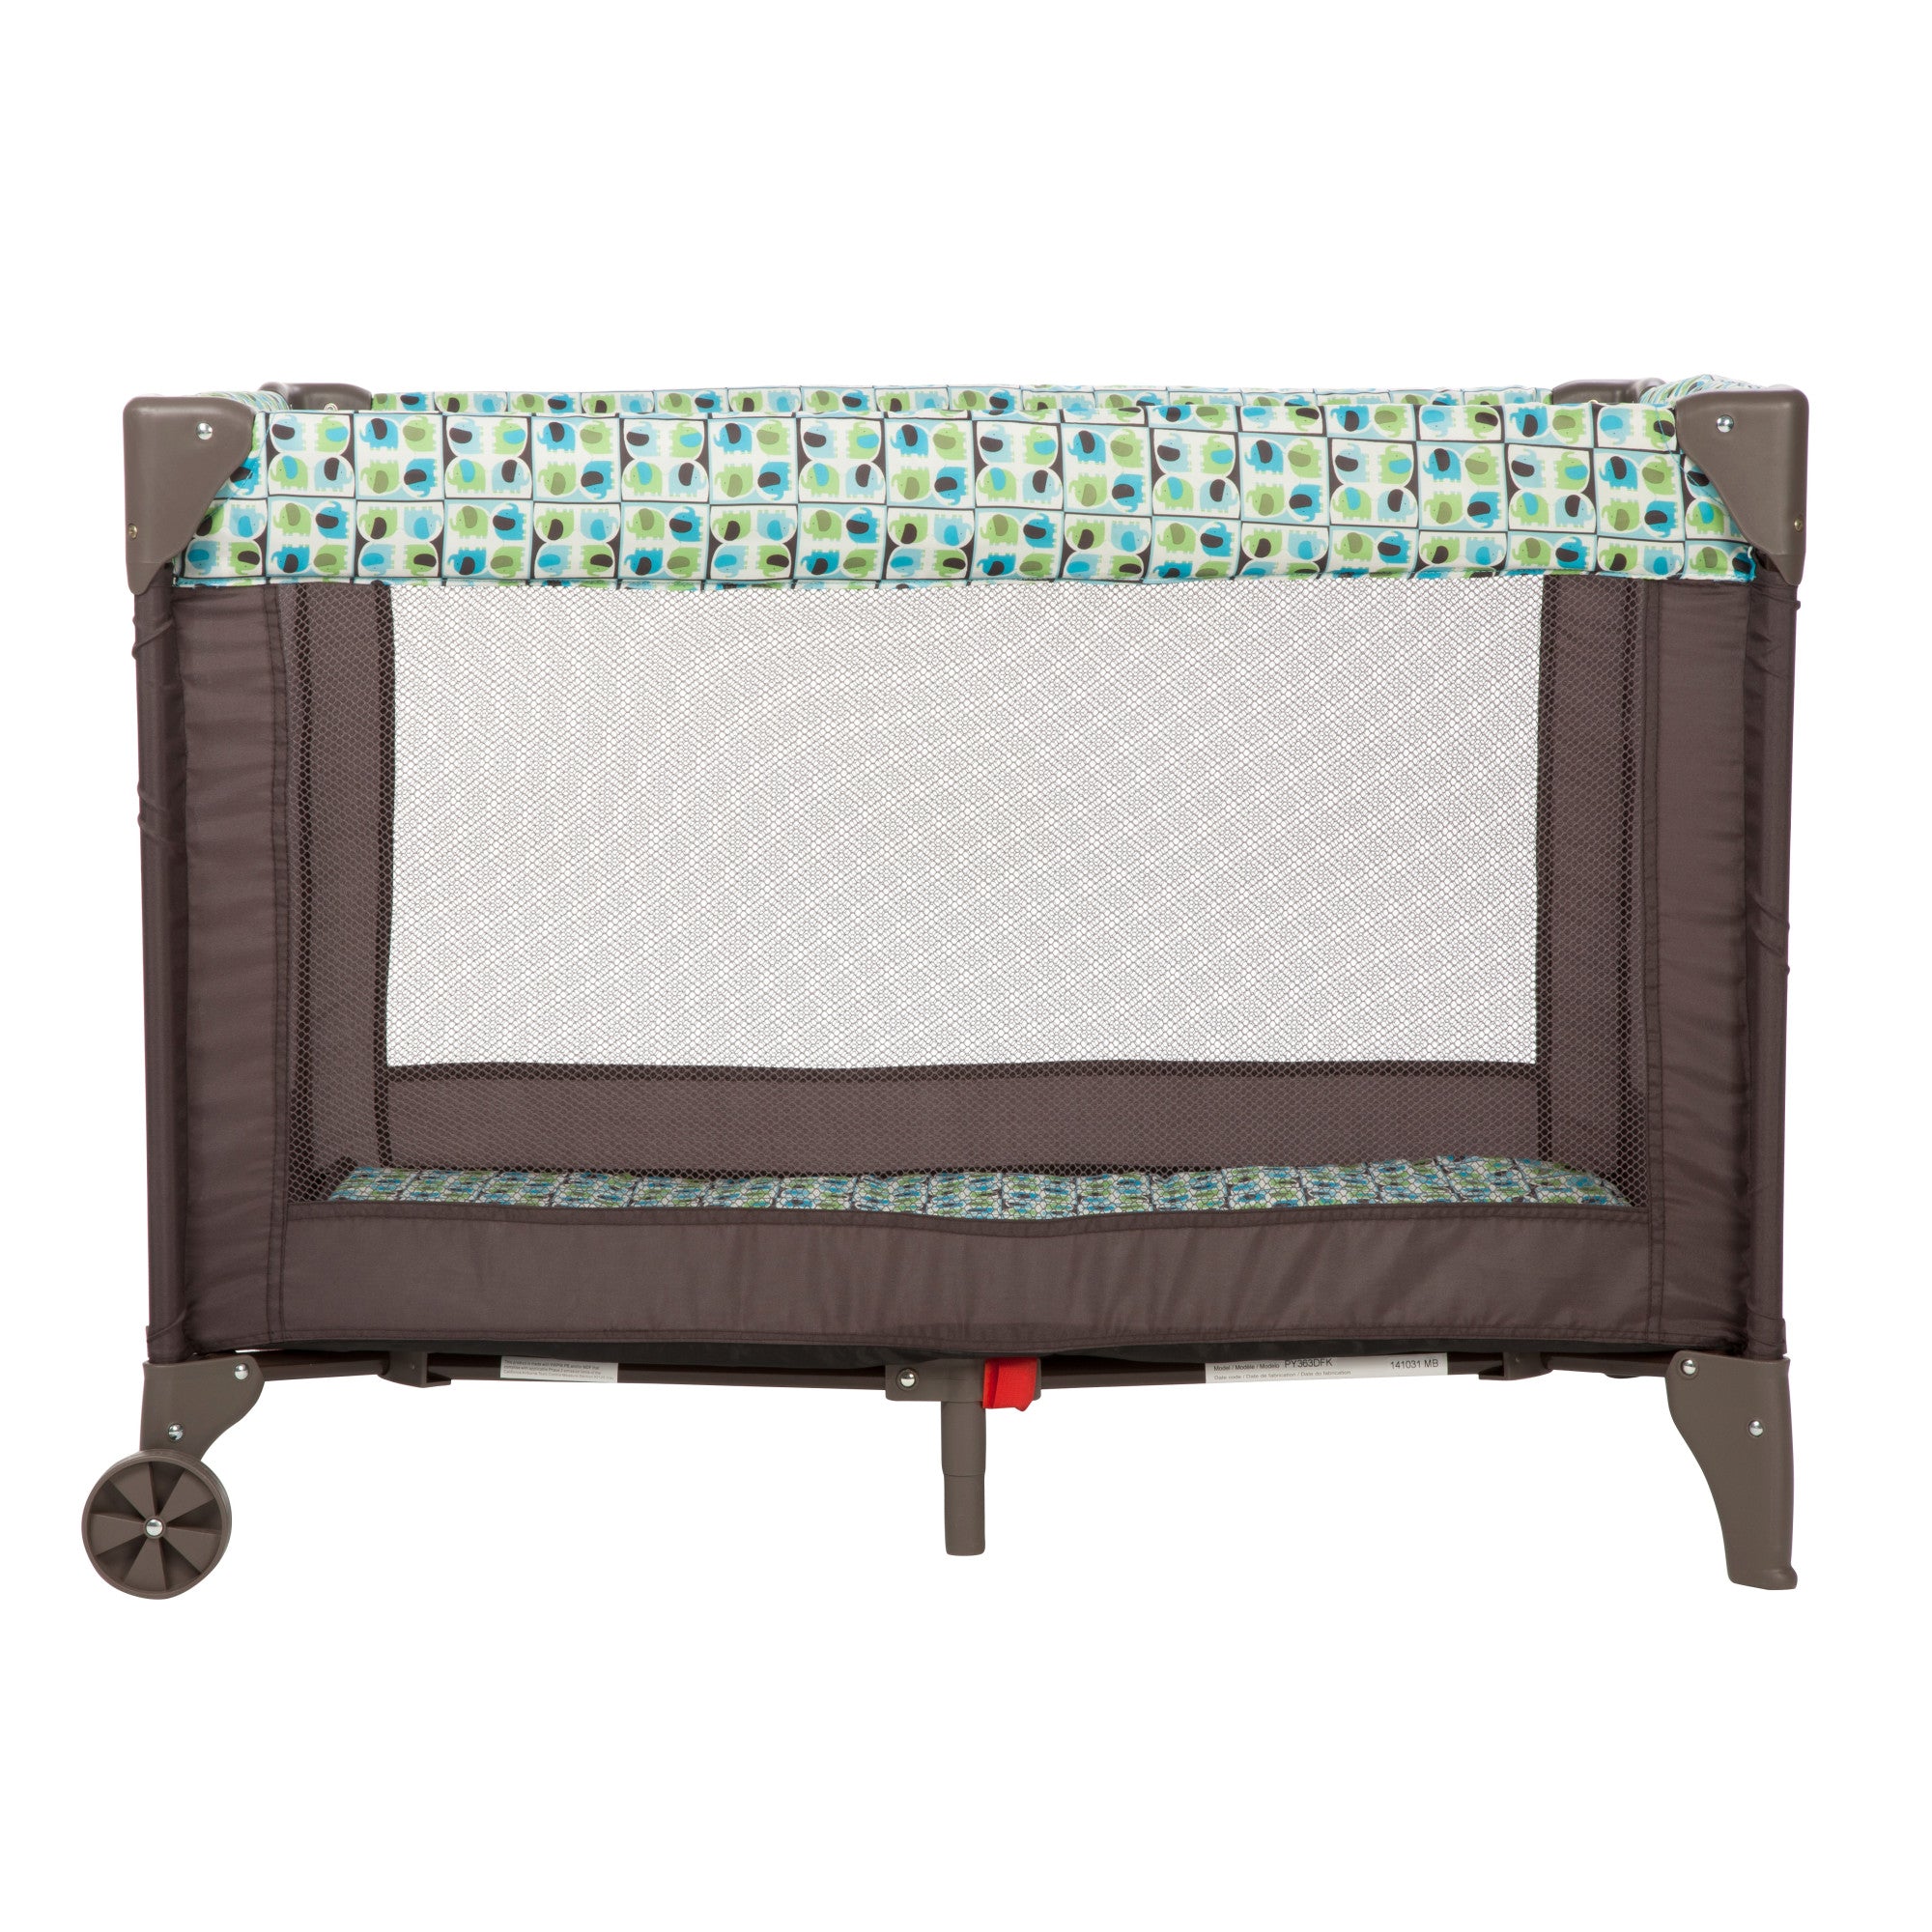 Funsport® Portable Compact Baby Play Yard - Elephant Squares